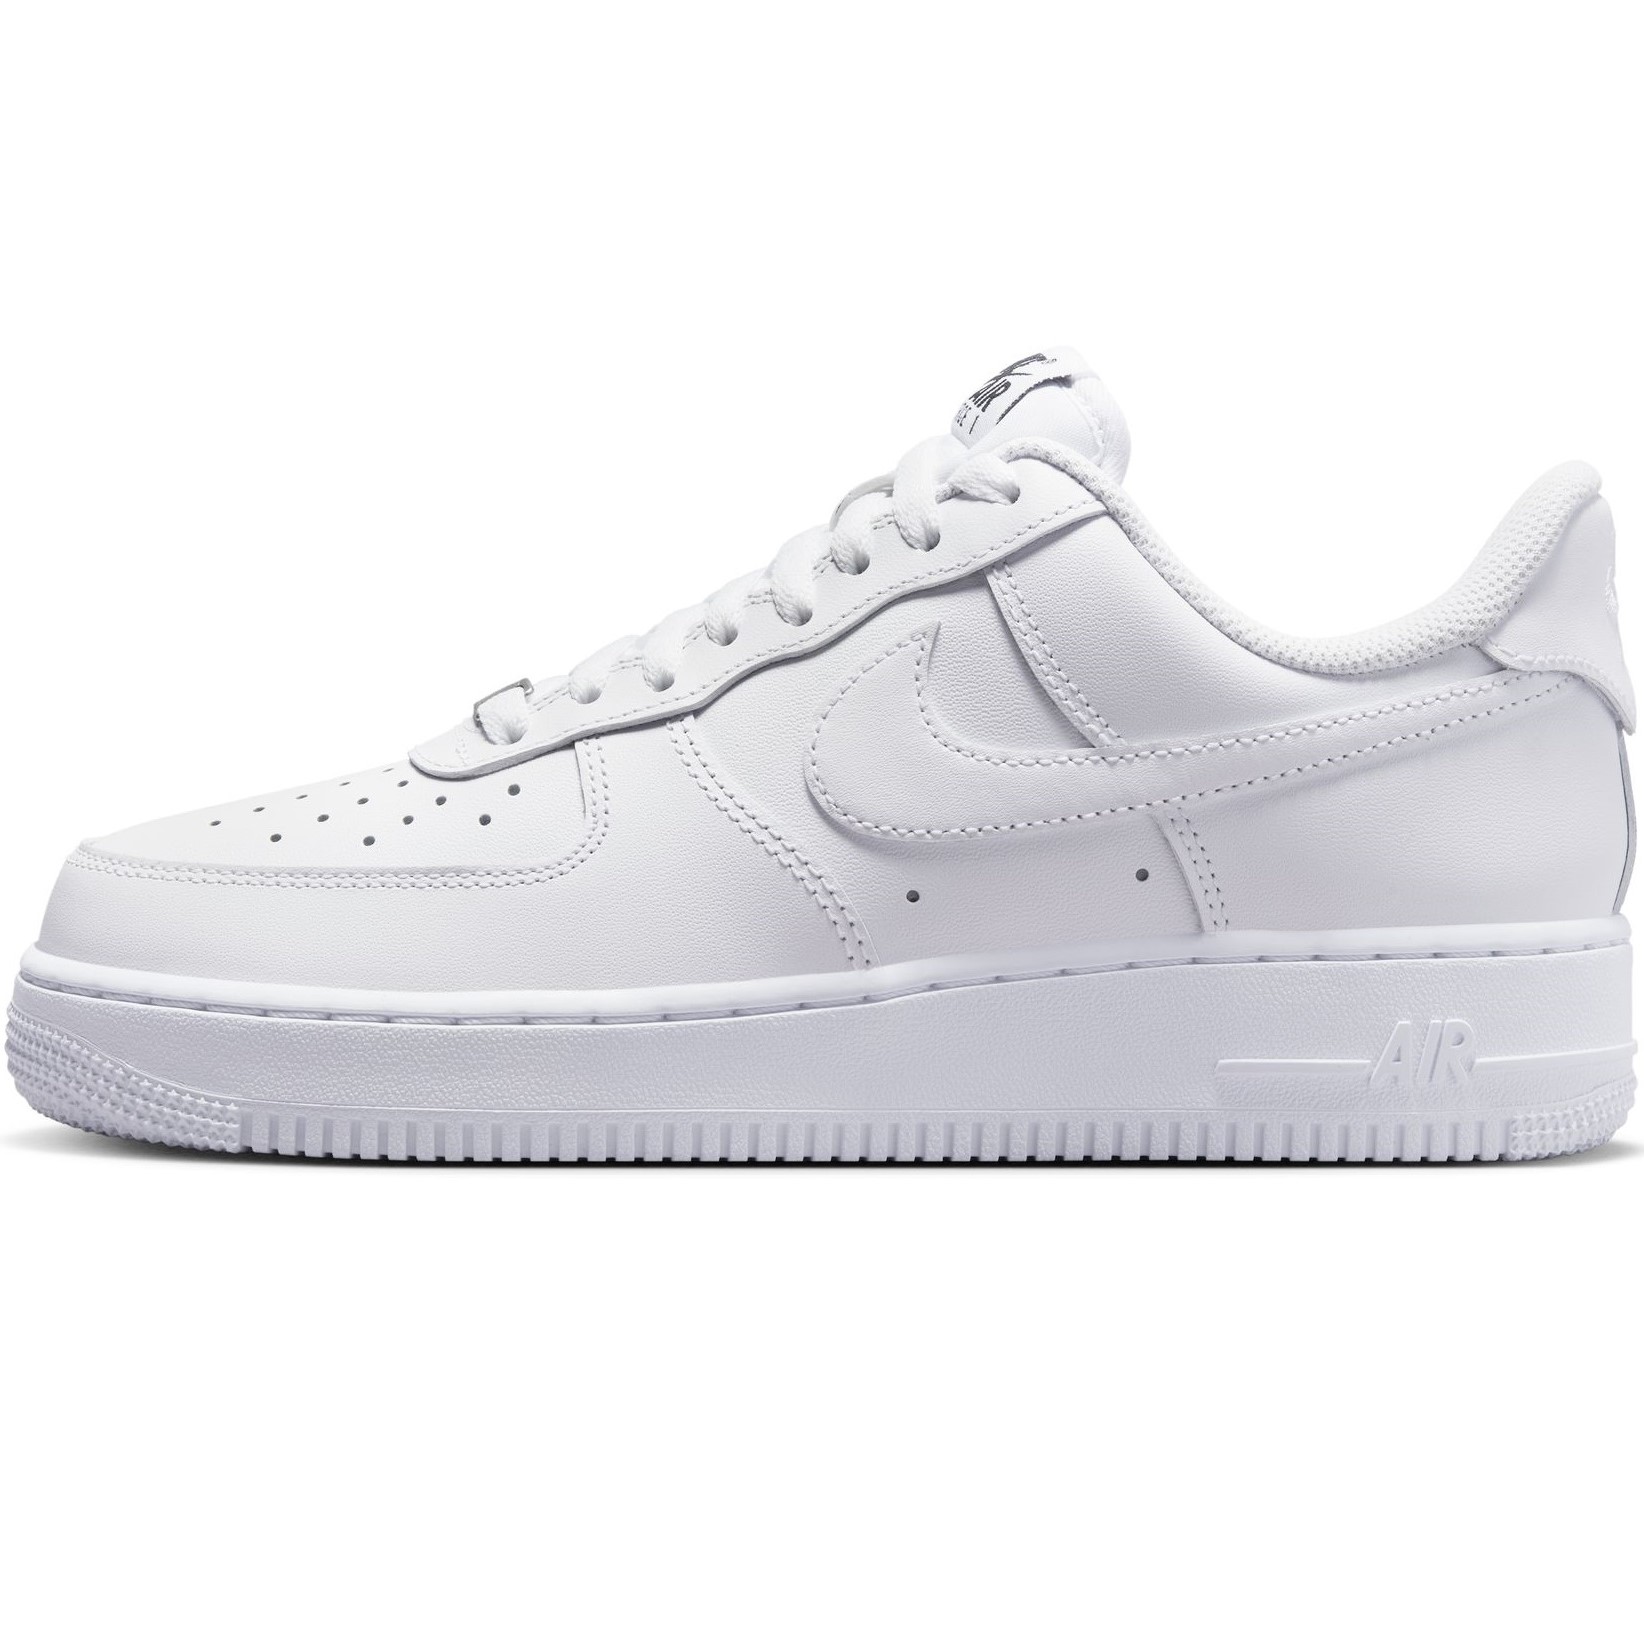 GIÀY THỂ THAO NỮ NIKE AIR FORCE 1 07 EASYON WHITE WOMENS SHOES DX5883-100 5